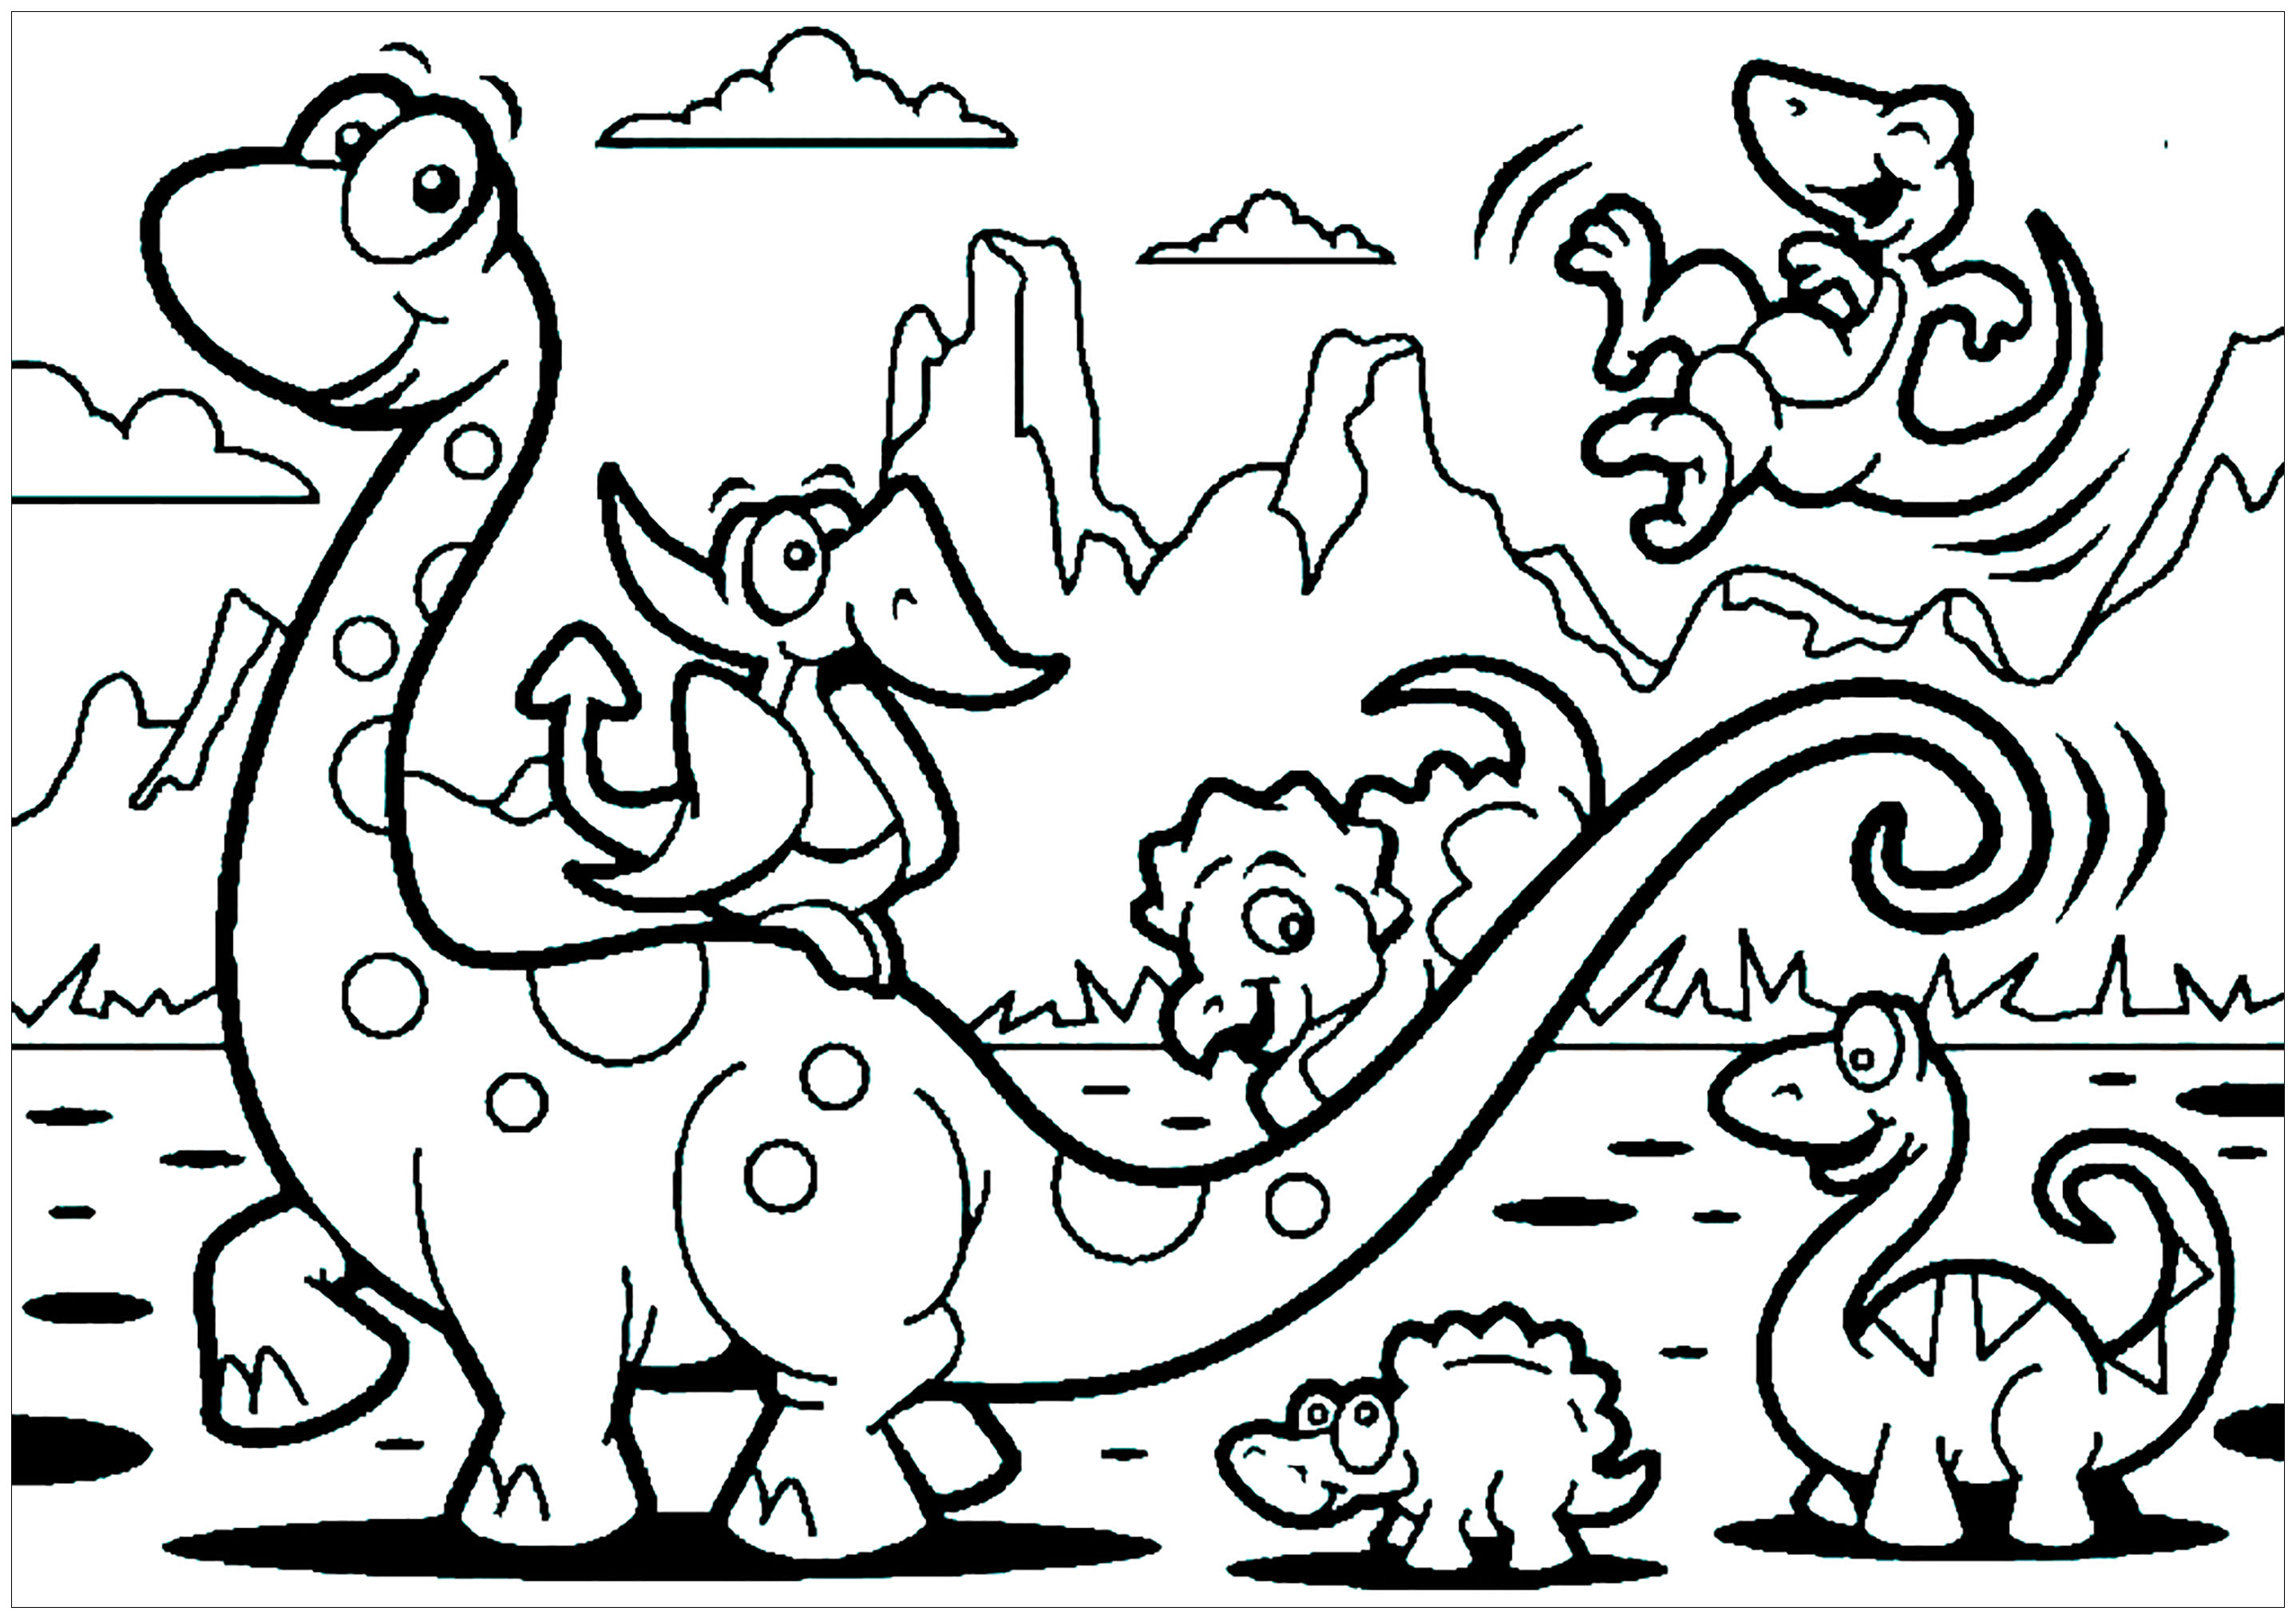 dinosaur-pictures-for-kids-to-color-these-free-printable-dinosaur-coloring-pages-are-so-much